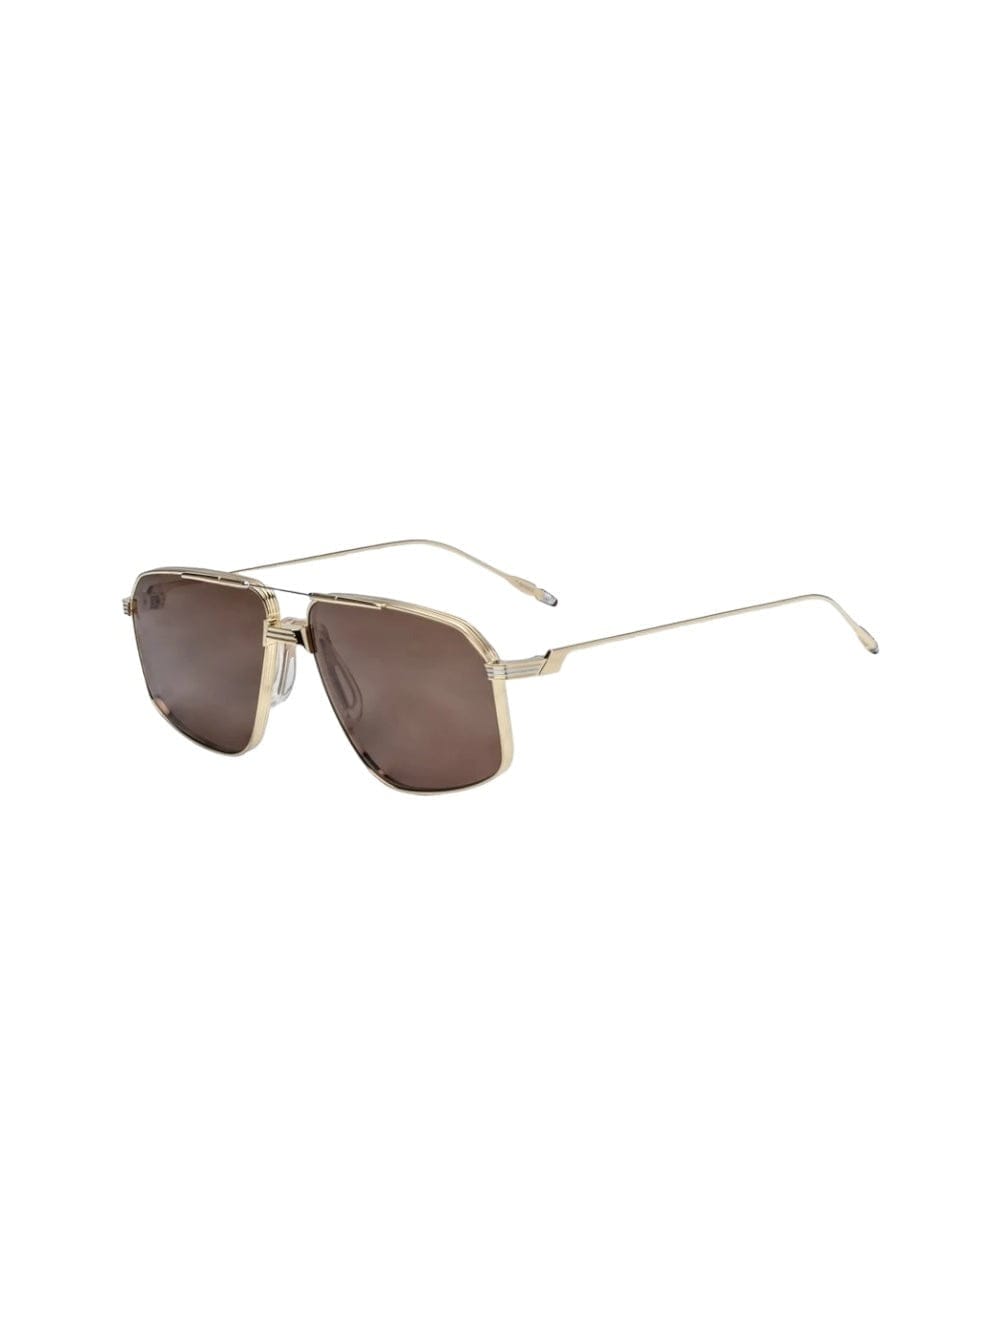 Jacques Marie Mage Jagger - Coco Sunglasses In Gold